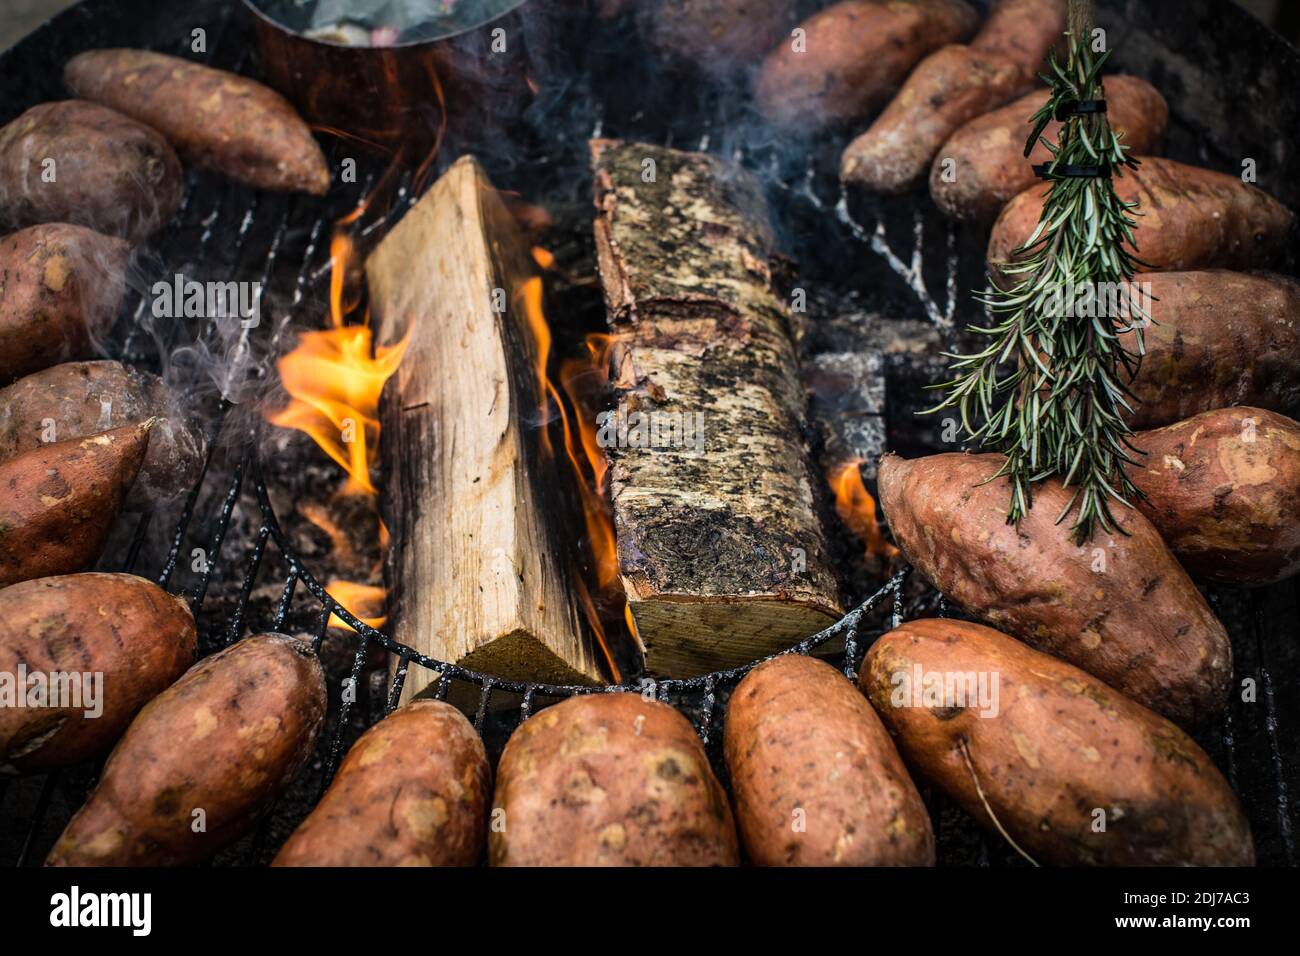 Fresh Whole Sweet Potatoes  cooking on a Grill Stock Photo